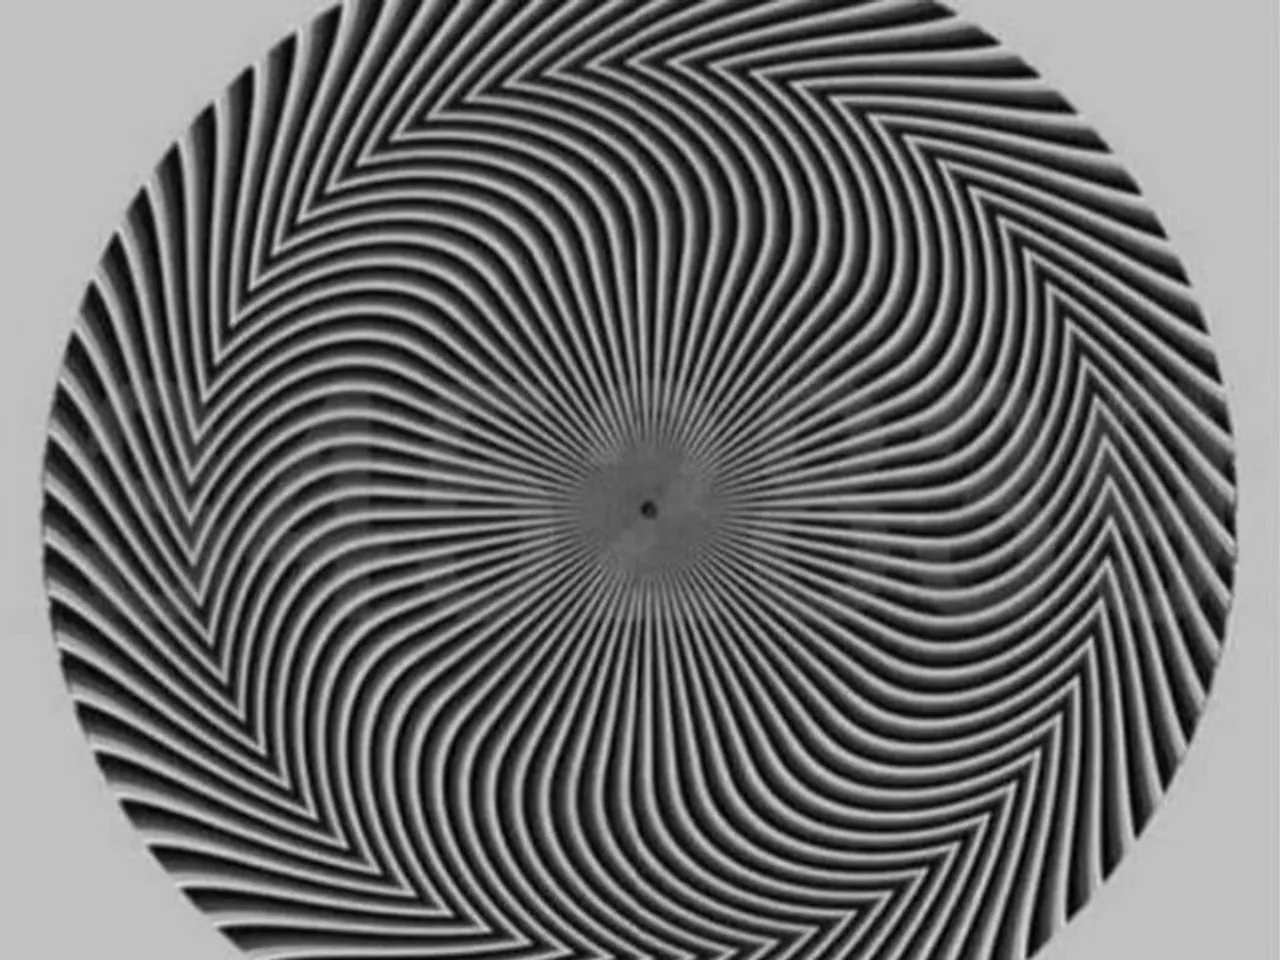 Optical illusion goes viral - how many numbers can you see